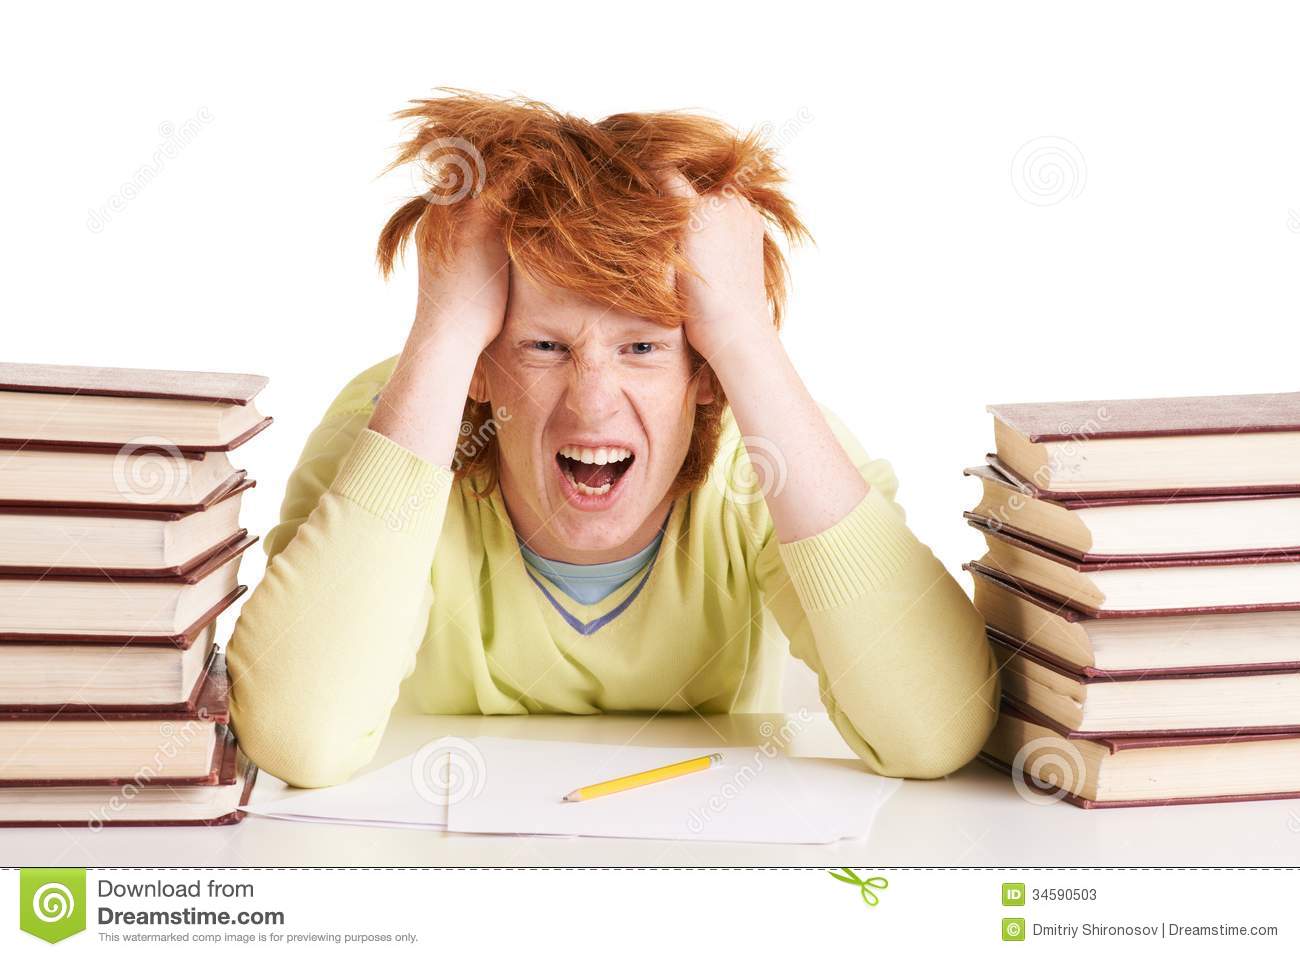 More Similar Stock Images Of   Sick And Tired  